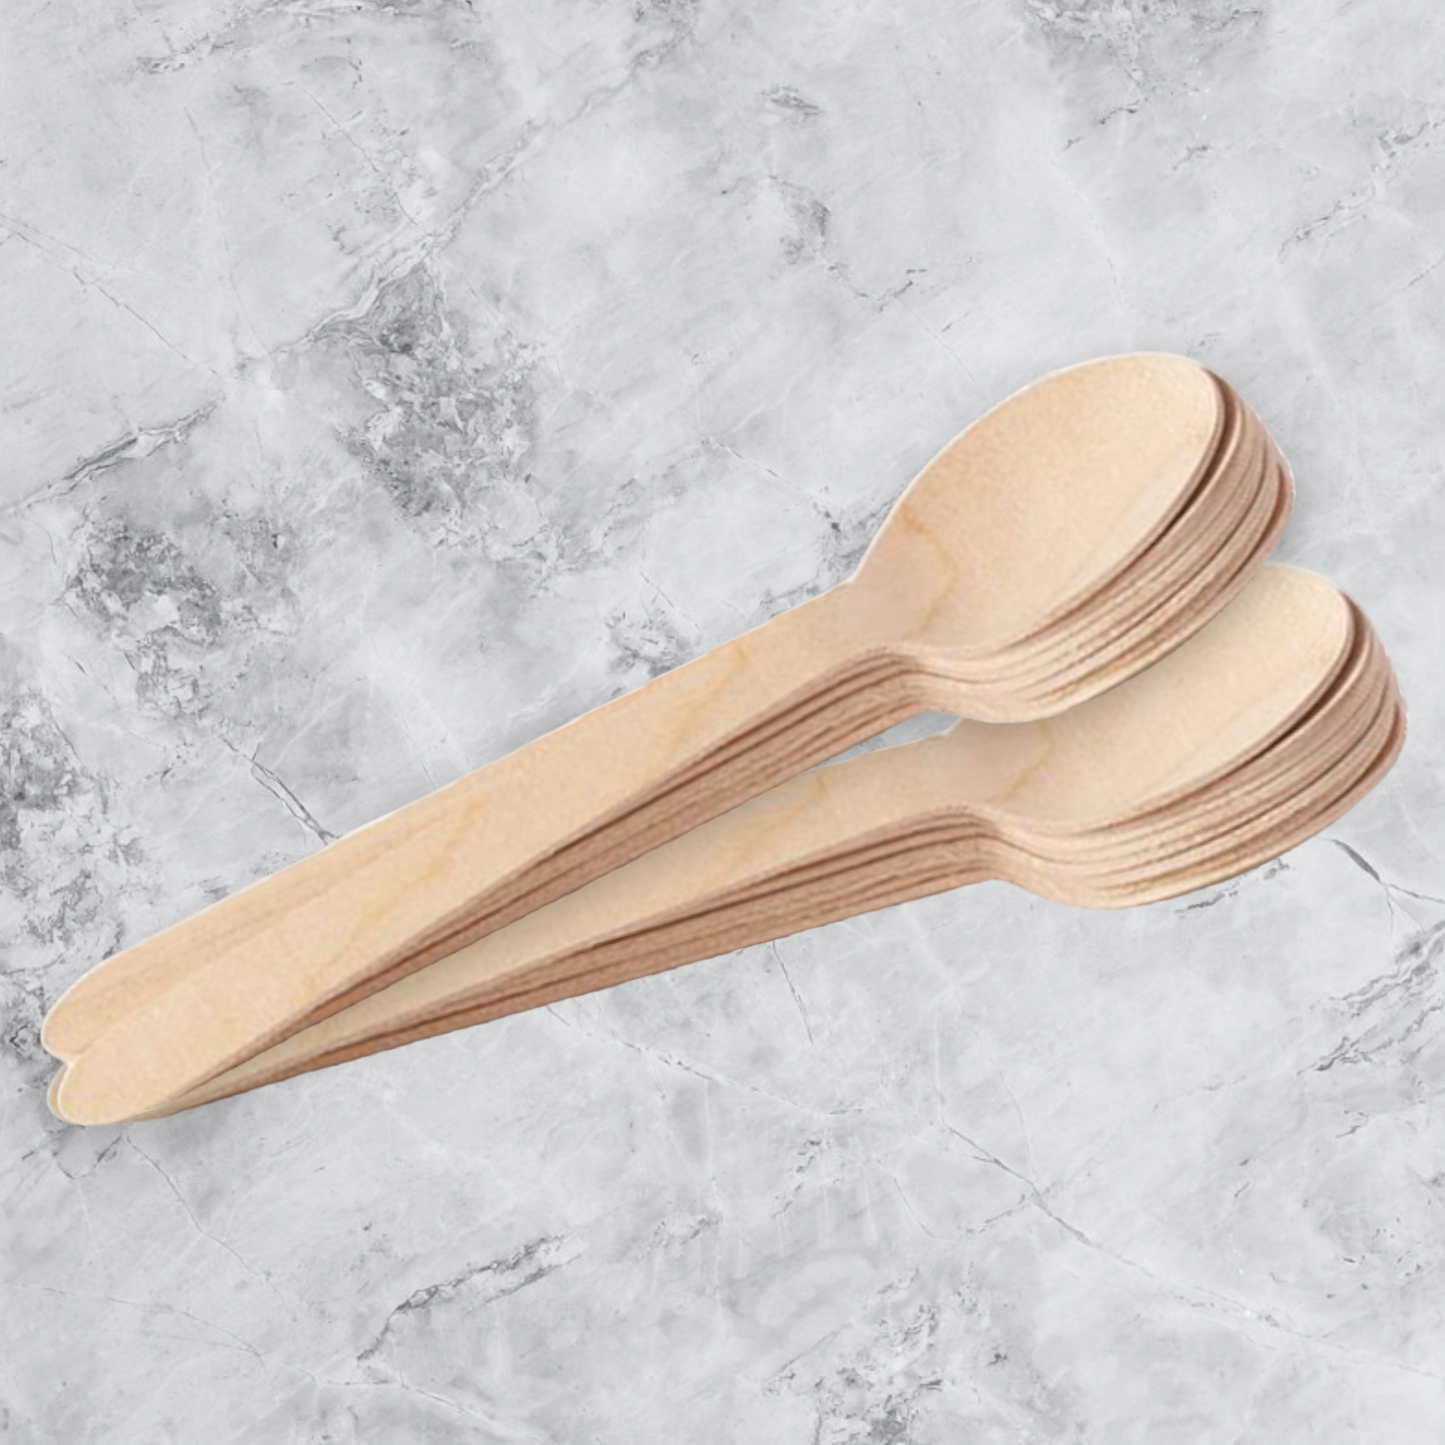 Bulk Compostable Wooden Spoon 6.3 Inch (160 mm) Wholesale Pricing in Canada